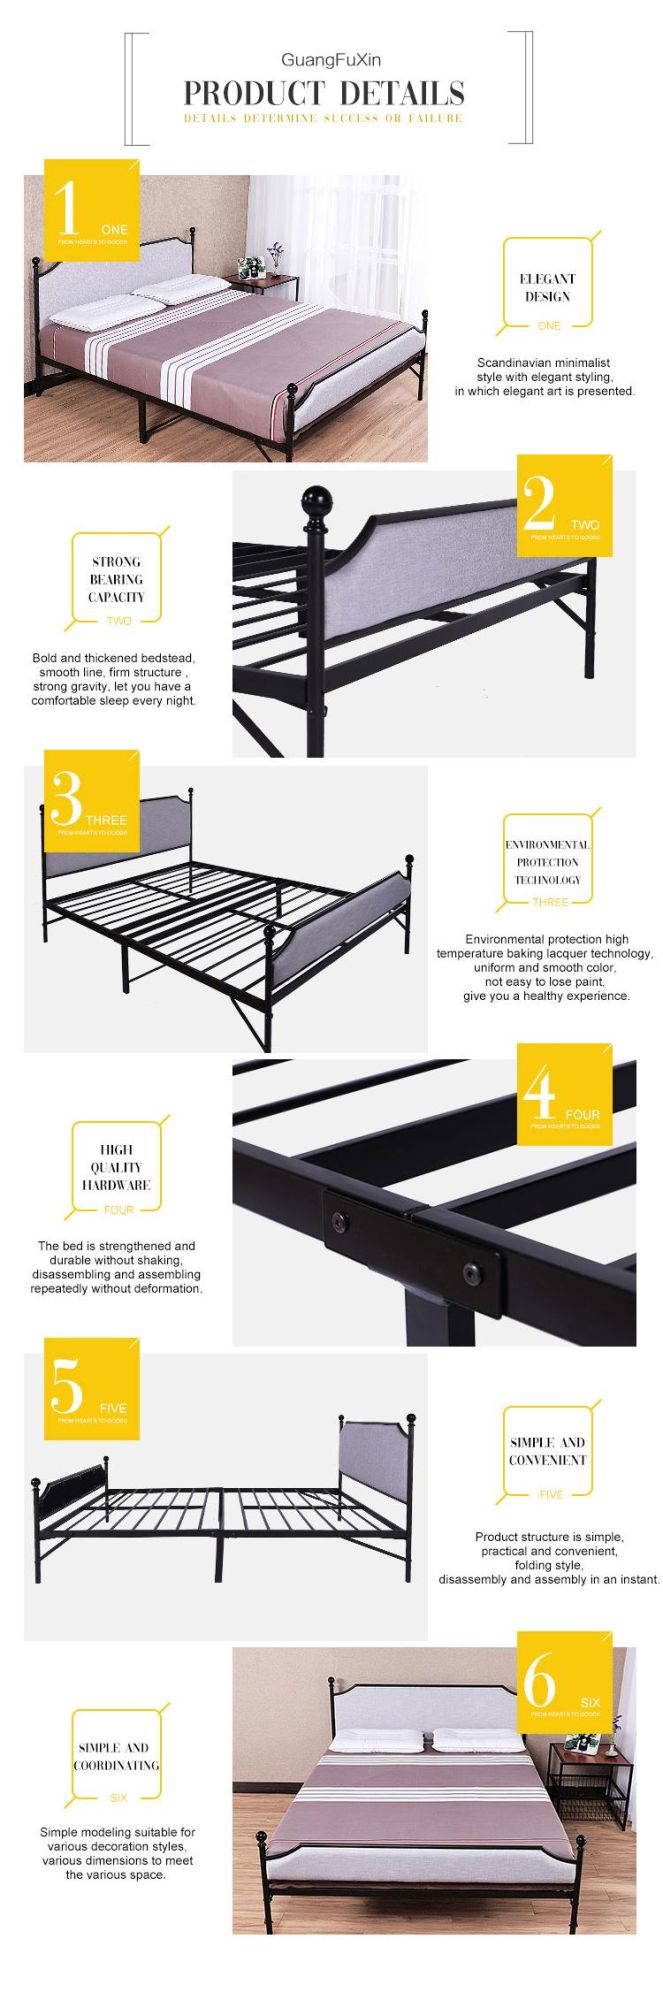 Modern Fashionable King and Queen Size Bed Frame